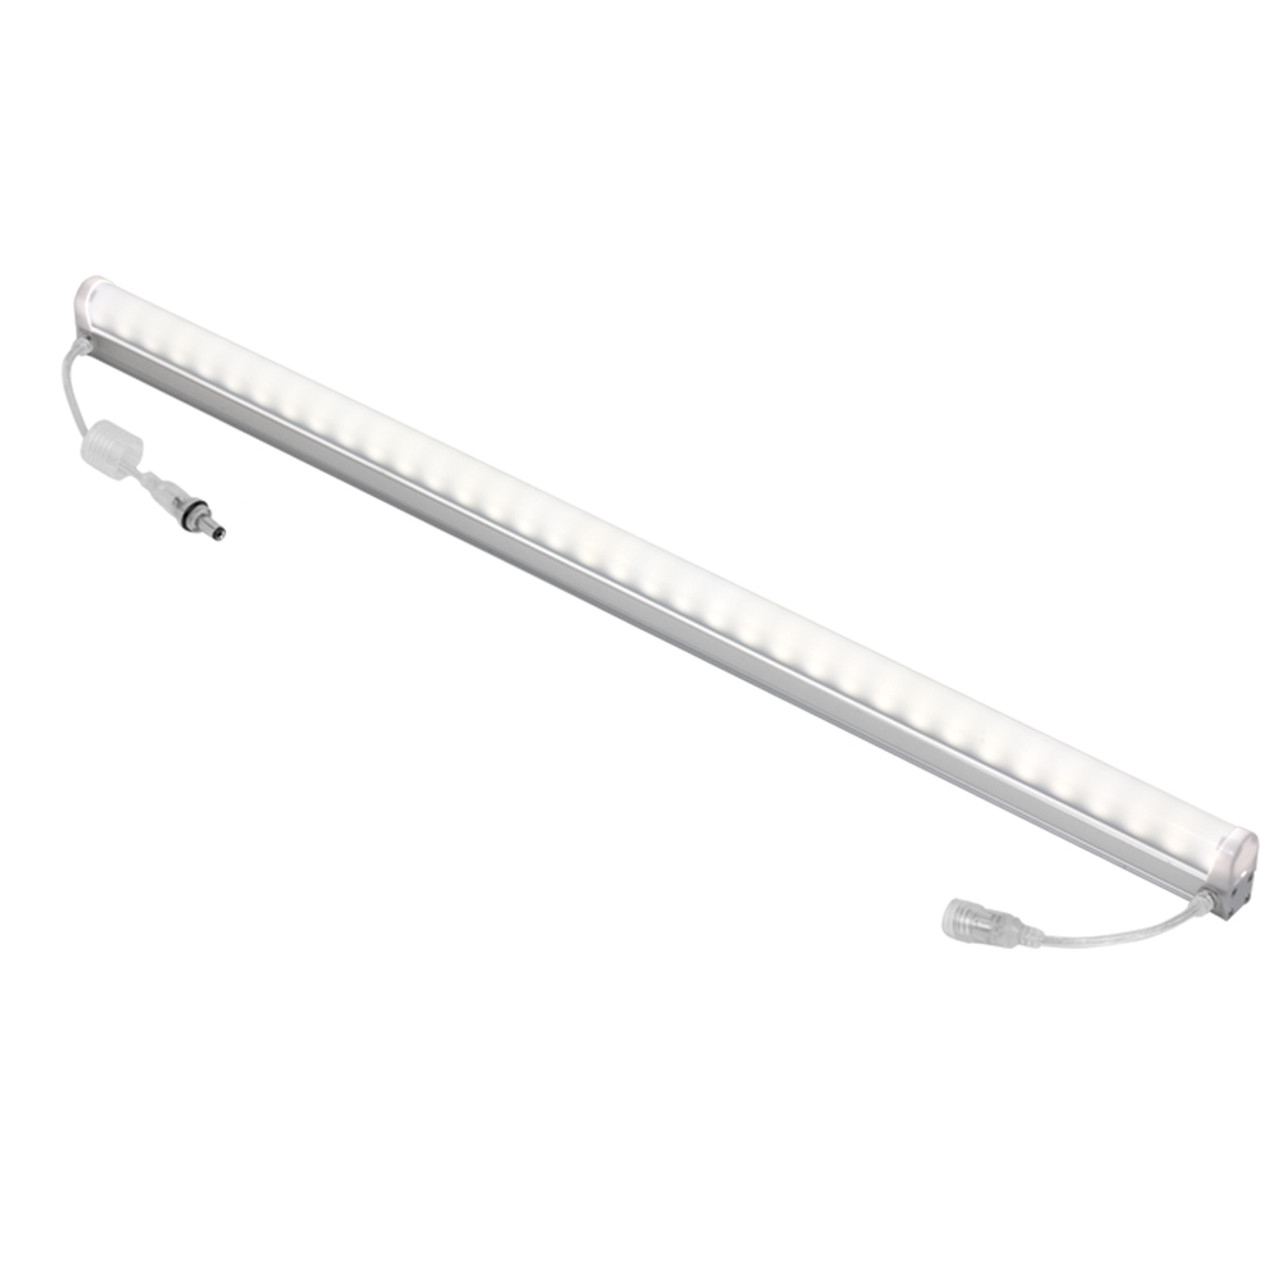 JESCO Lighting DL-RS-24-G-C 7.6W Dimmable linear LED fixture for wet,damp and dry locations. Aluminium extruded housing. Opal Cover is optional., Green